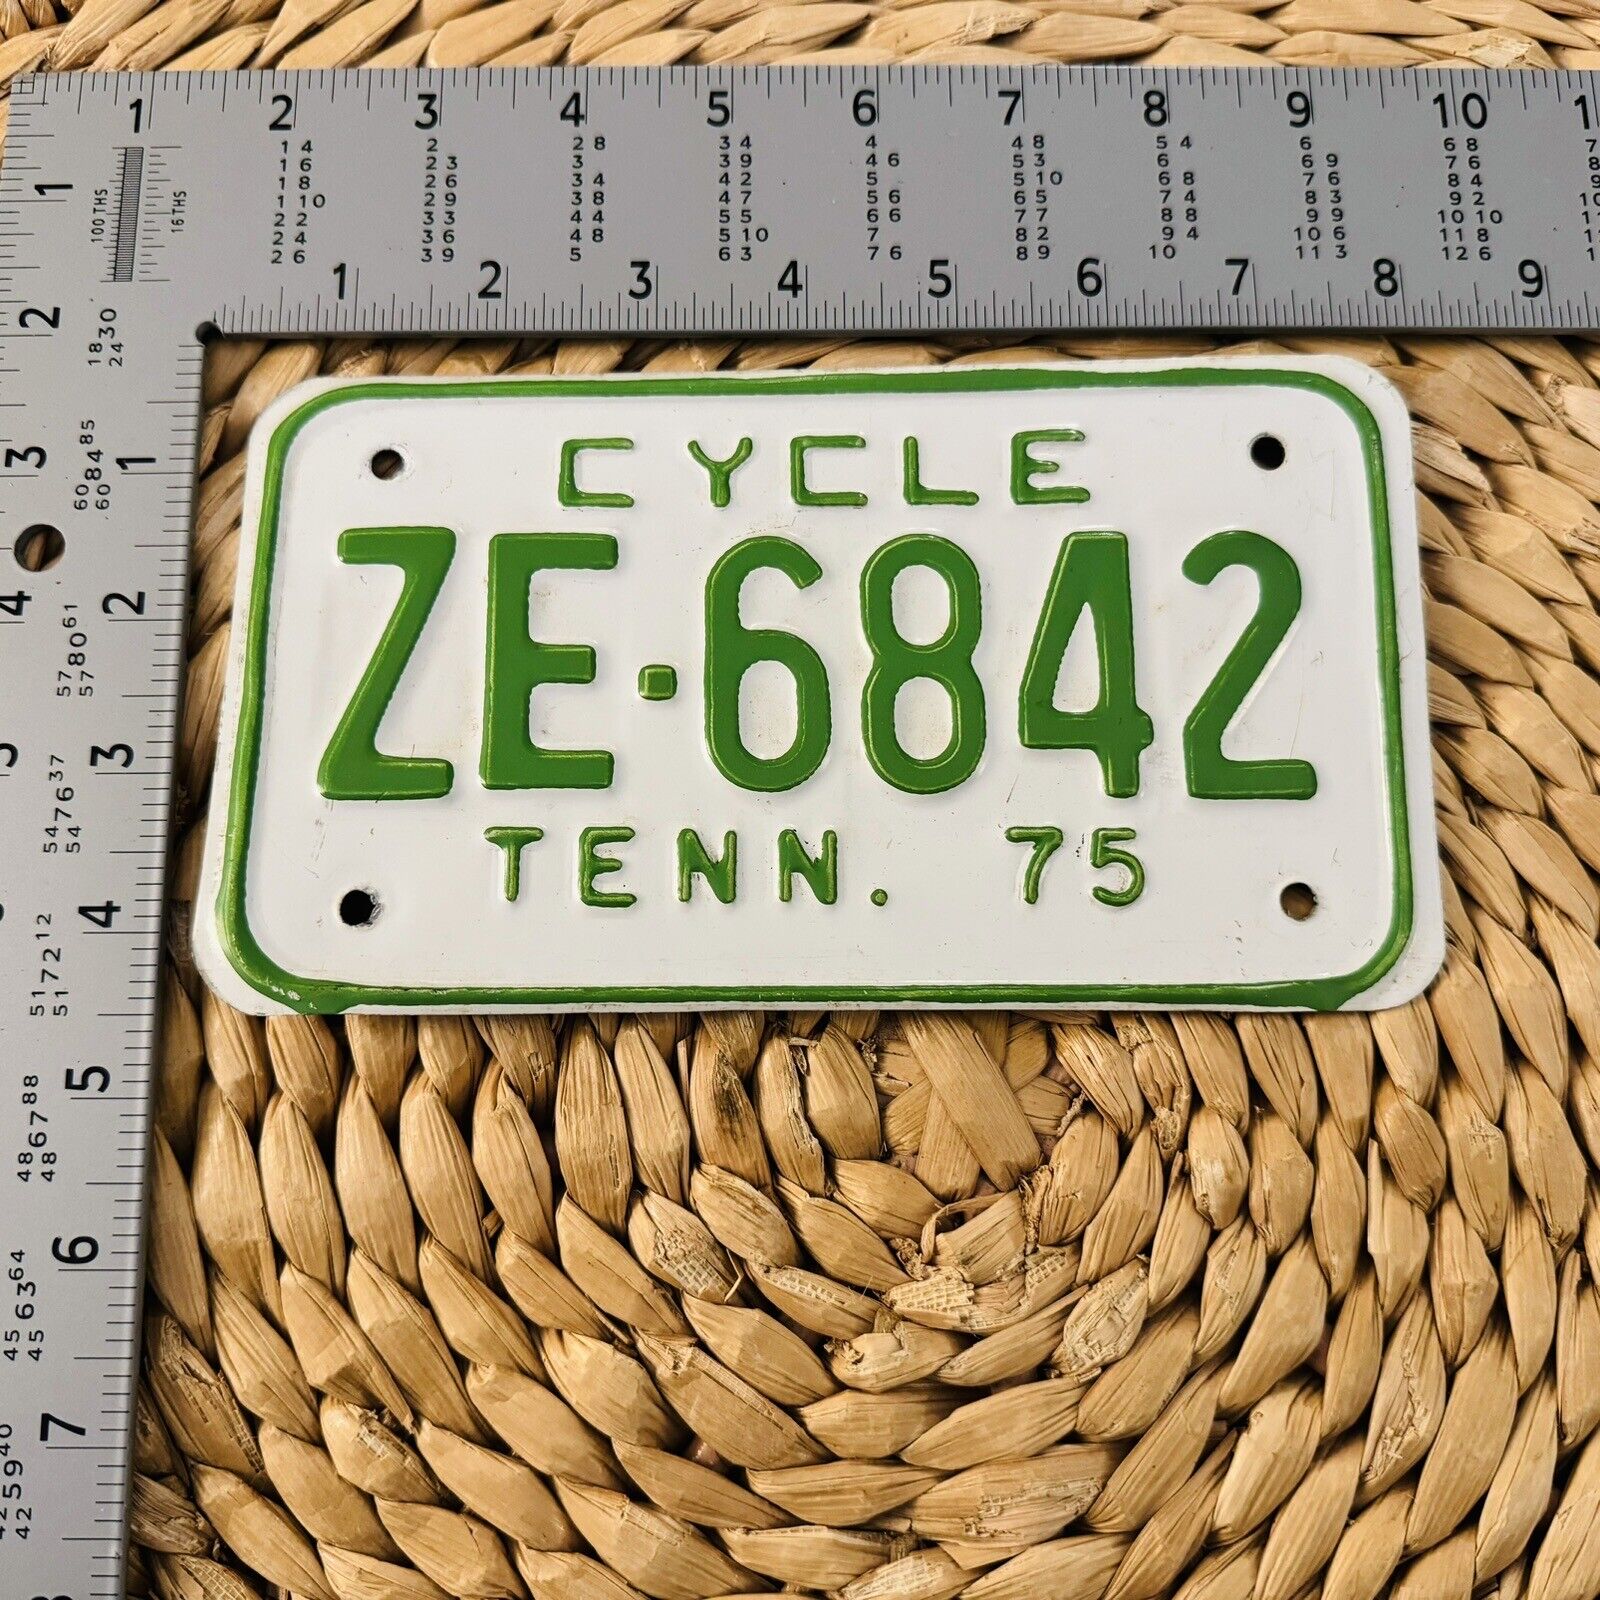 1975 Tennessee MOTORCYCLE License Plate ALPCA BMW Harley Indian Norton ZE6842